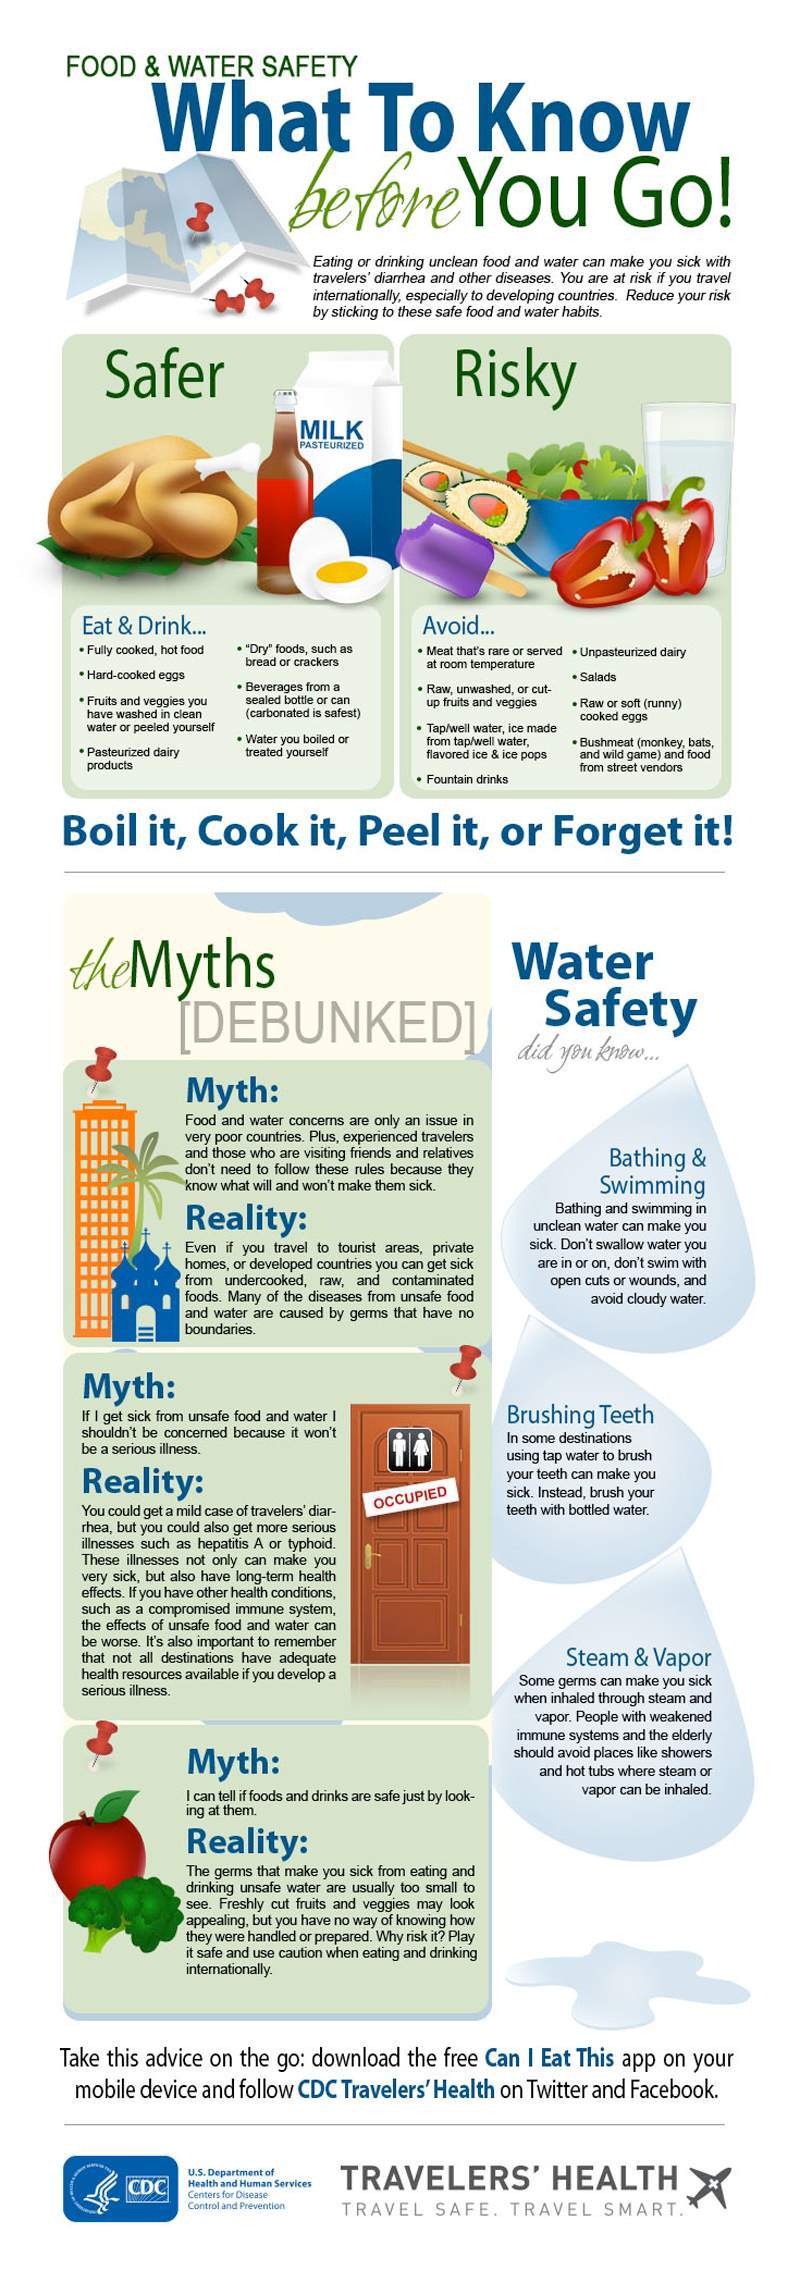 Info graphic containing knowledge about food and water safety